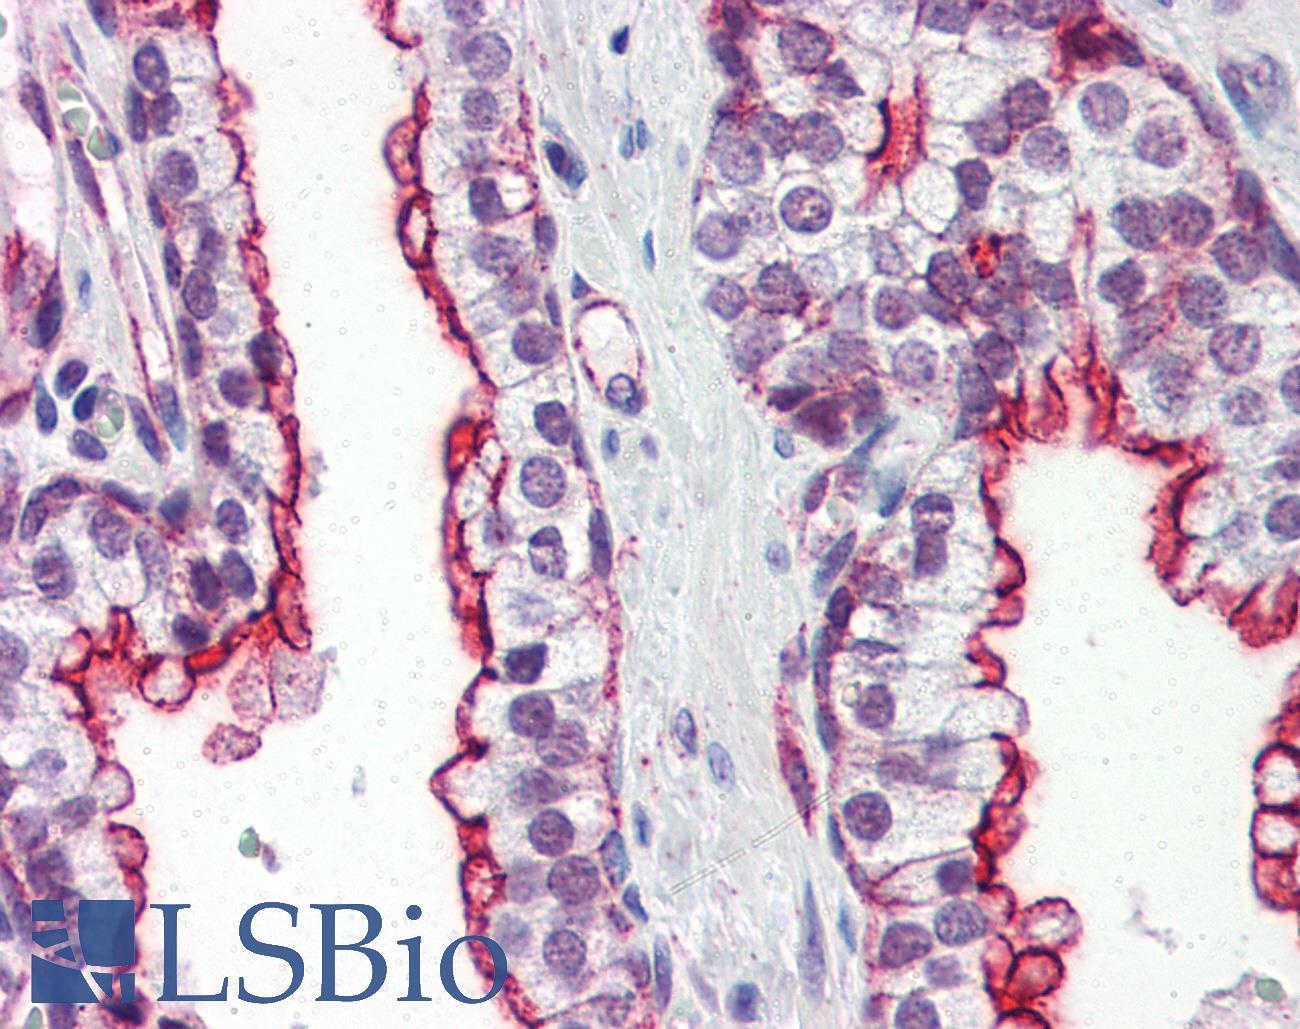 CLU / Clusterin Antibody - Anti-Clusterin antibody IHC of human prostate. Immunohistochemistry of formalin-fixed, paraffin-embedded tissue after heat-induced antigen retrieval. Antibody concentration 10 ug/ml.